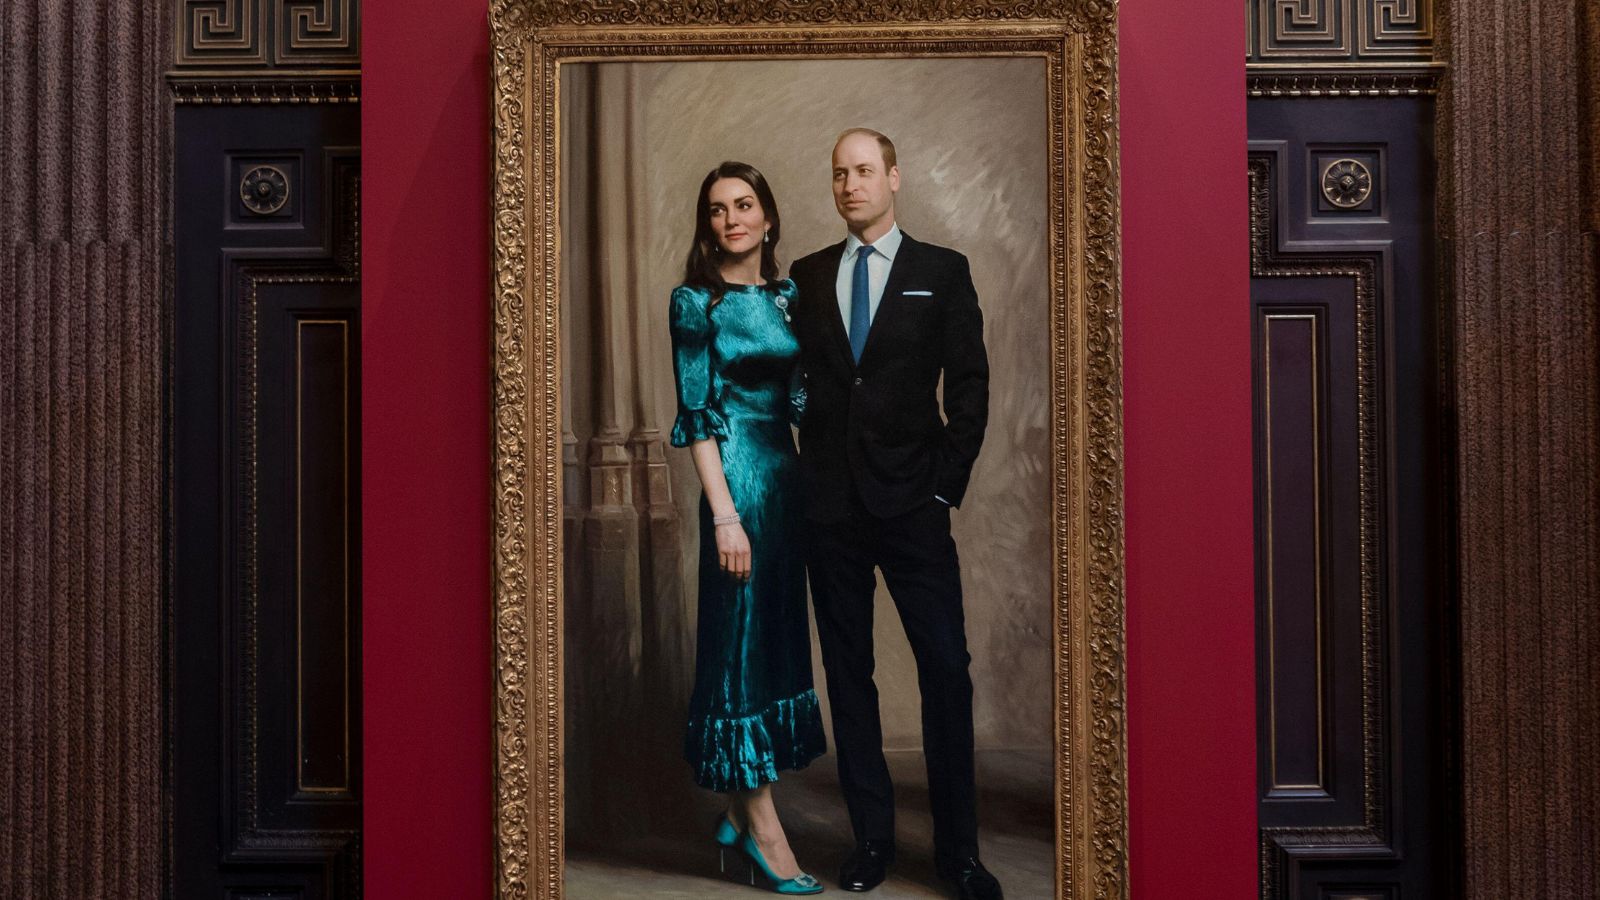 Kate Middleton and Prince William’s relationship in pictures first portrait